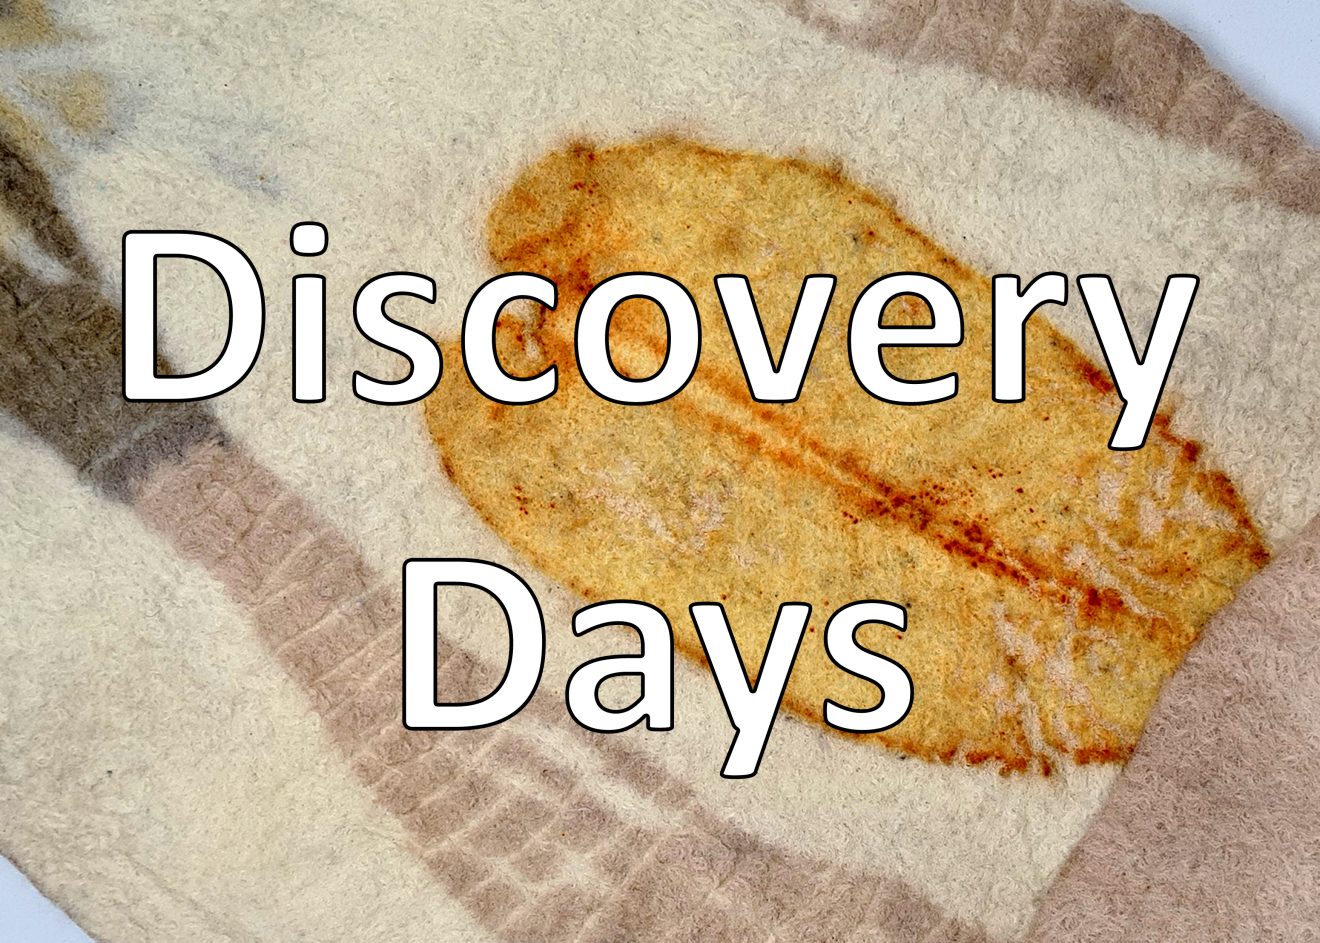 Discovery Days 2023